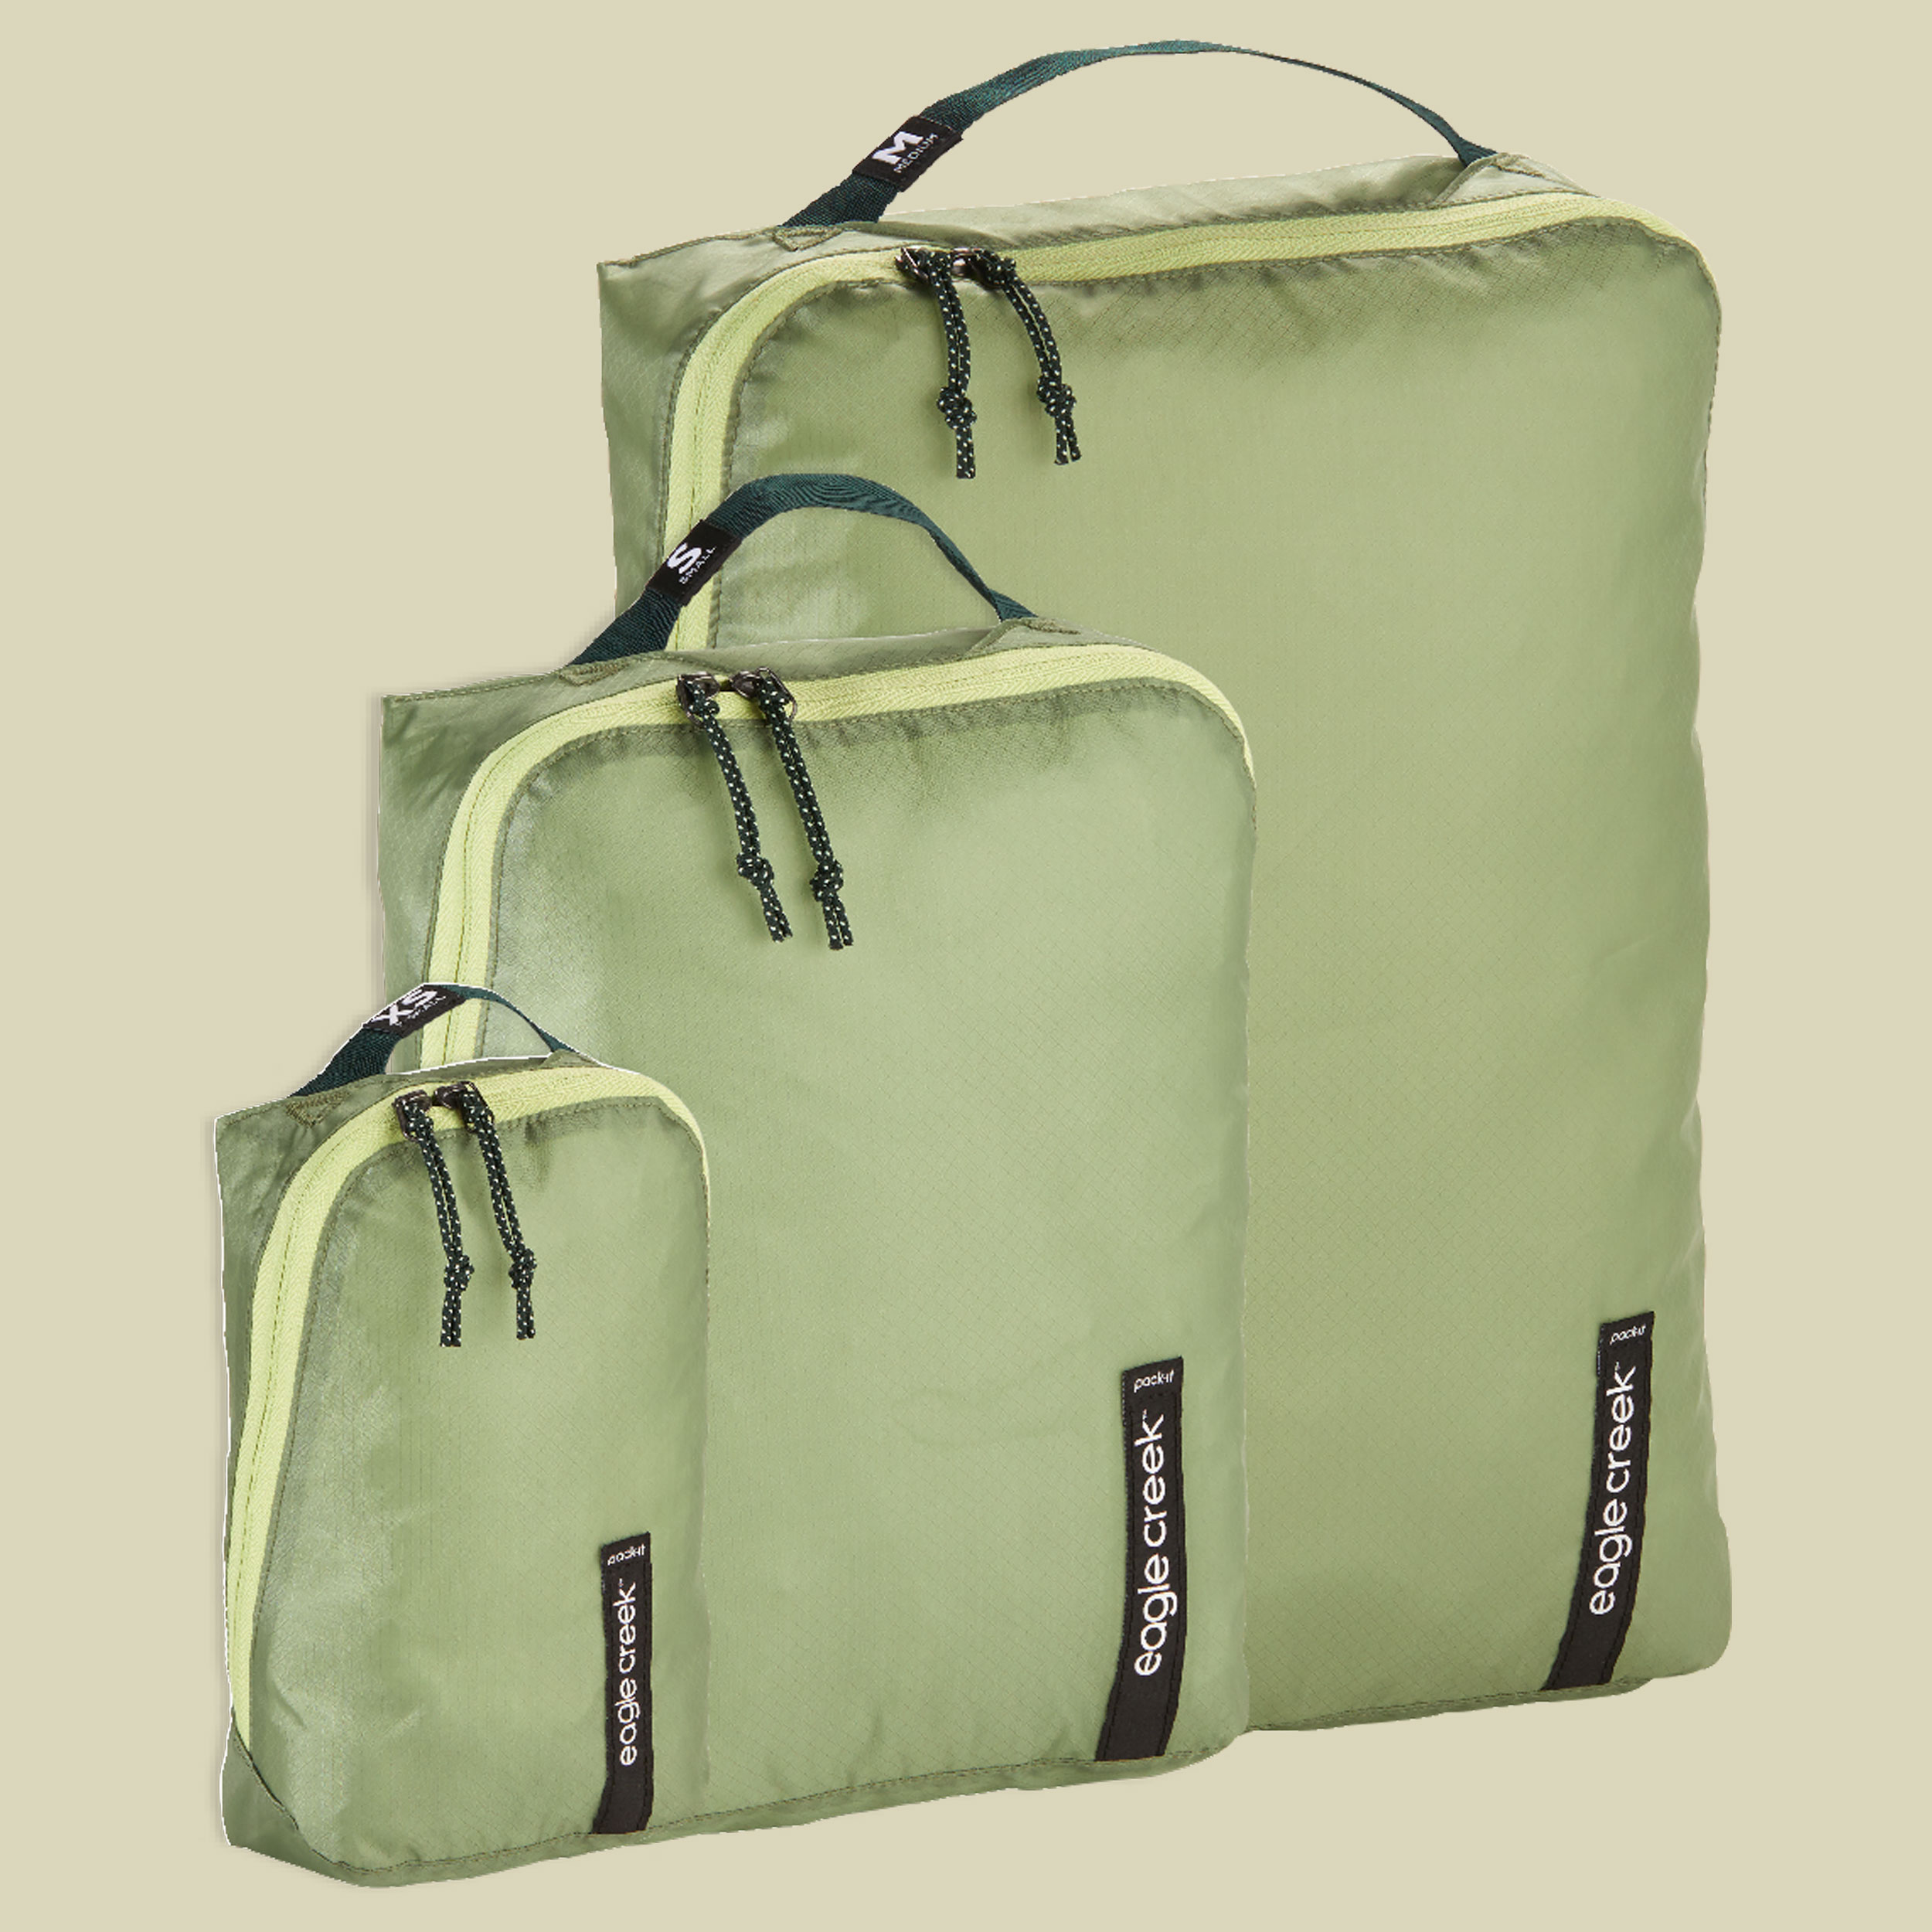 Pack-It Isolate Cube Set 3-er Set Farbe mossy green